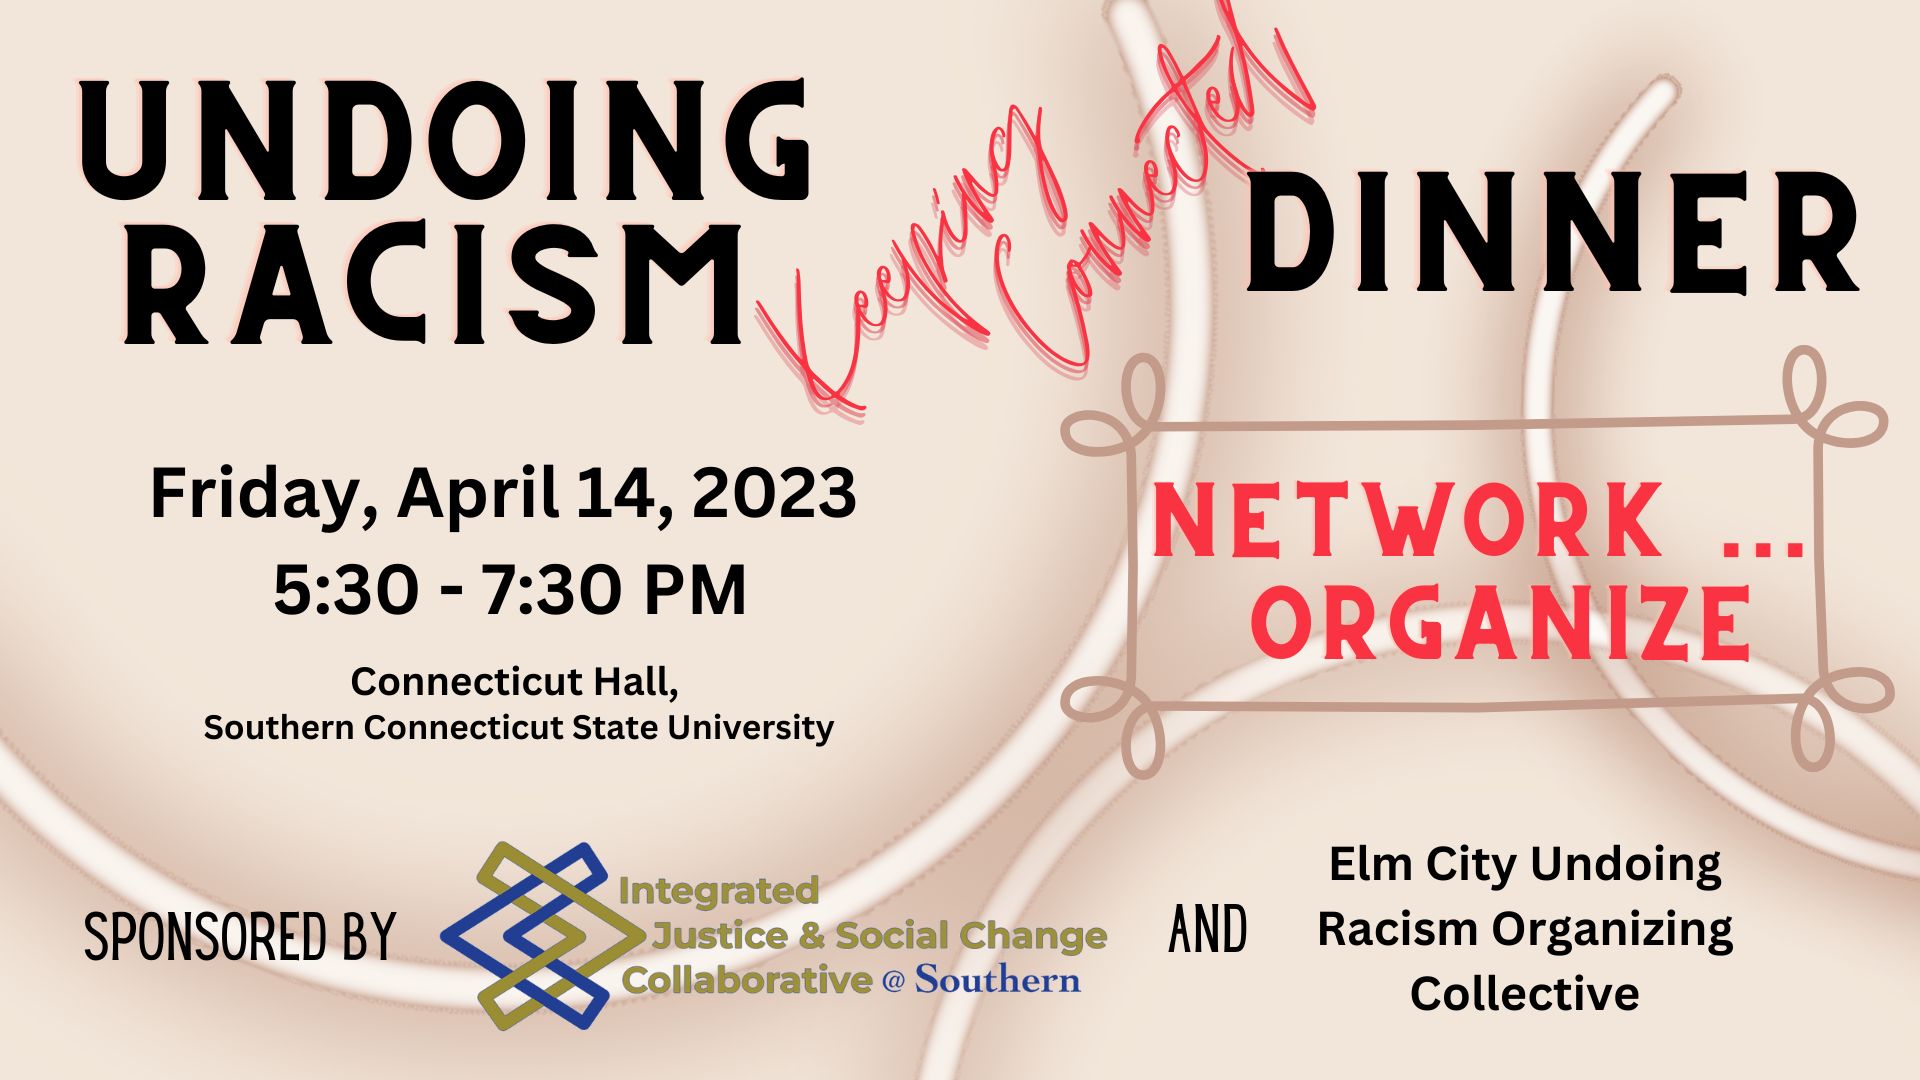 Poster for UROC Keeping Connected Dinner April 14, 2023 5:30-7:30pm Conn Hall SCSU